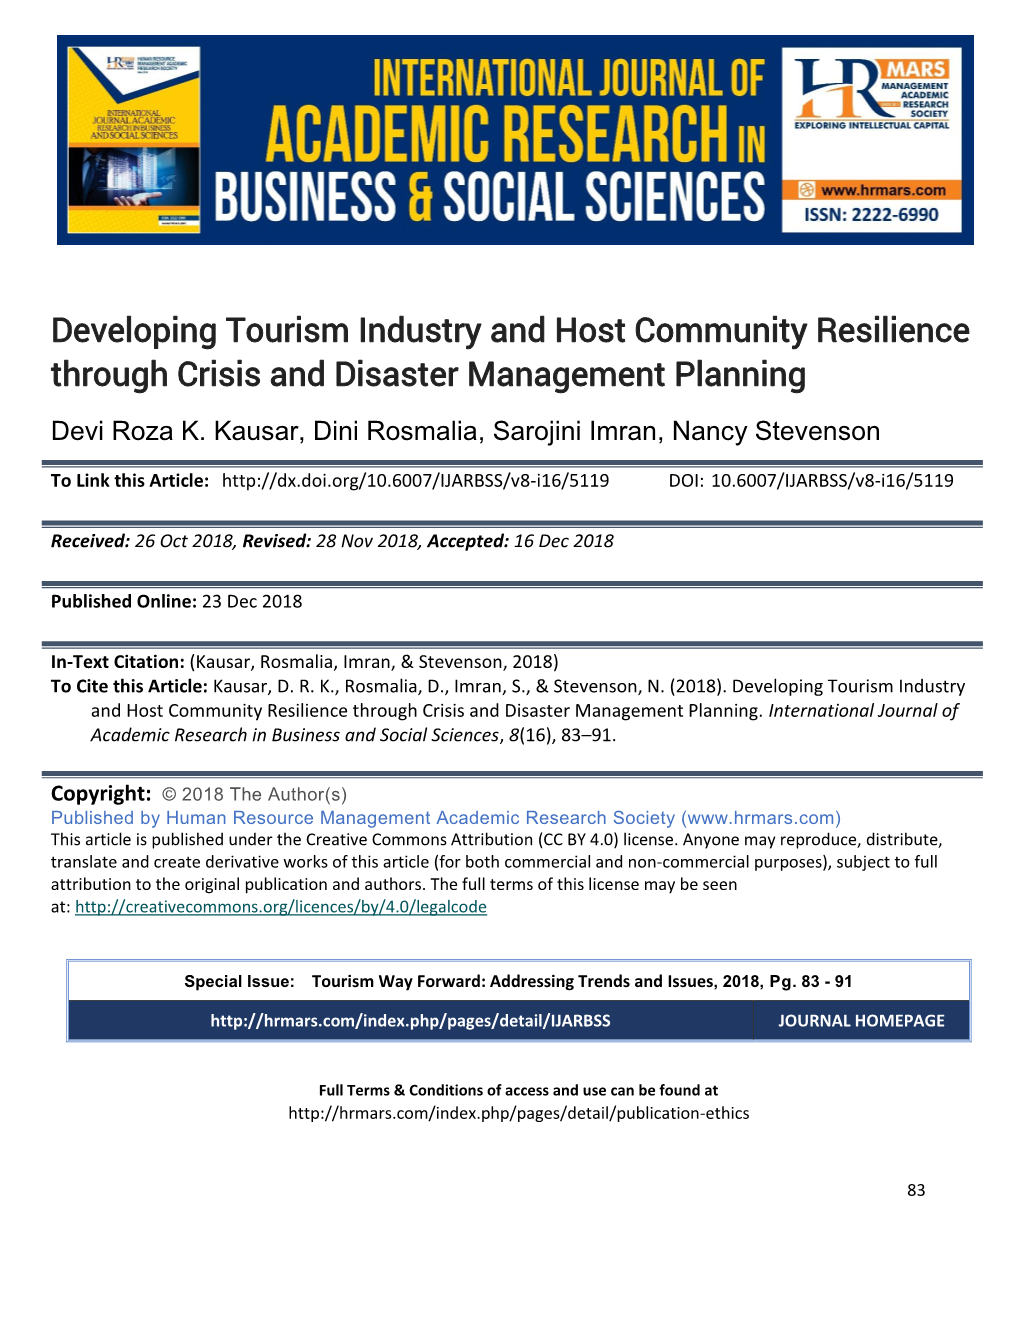 Developing Tourism Industry and Host Community Resilience Through Crisis and Disaster Management Planning